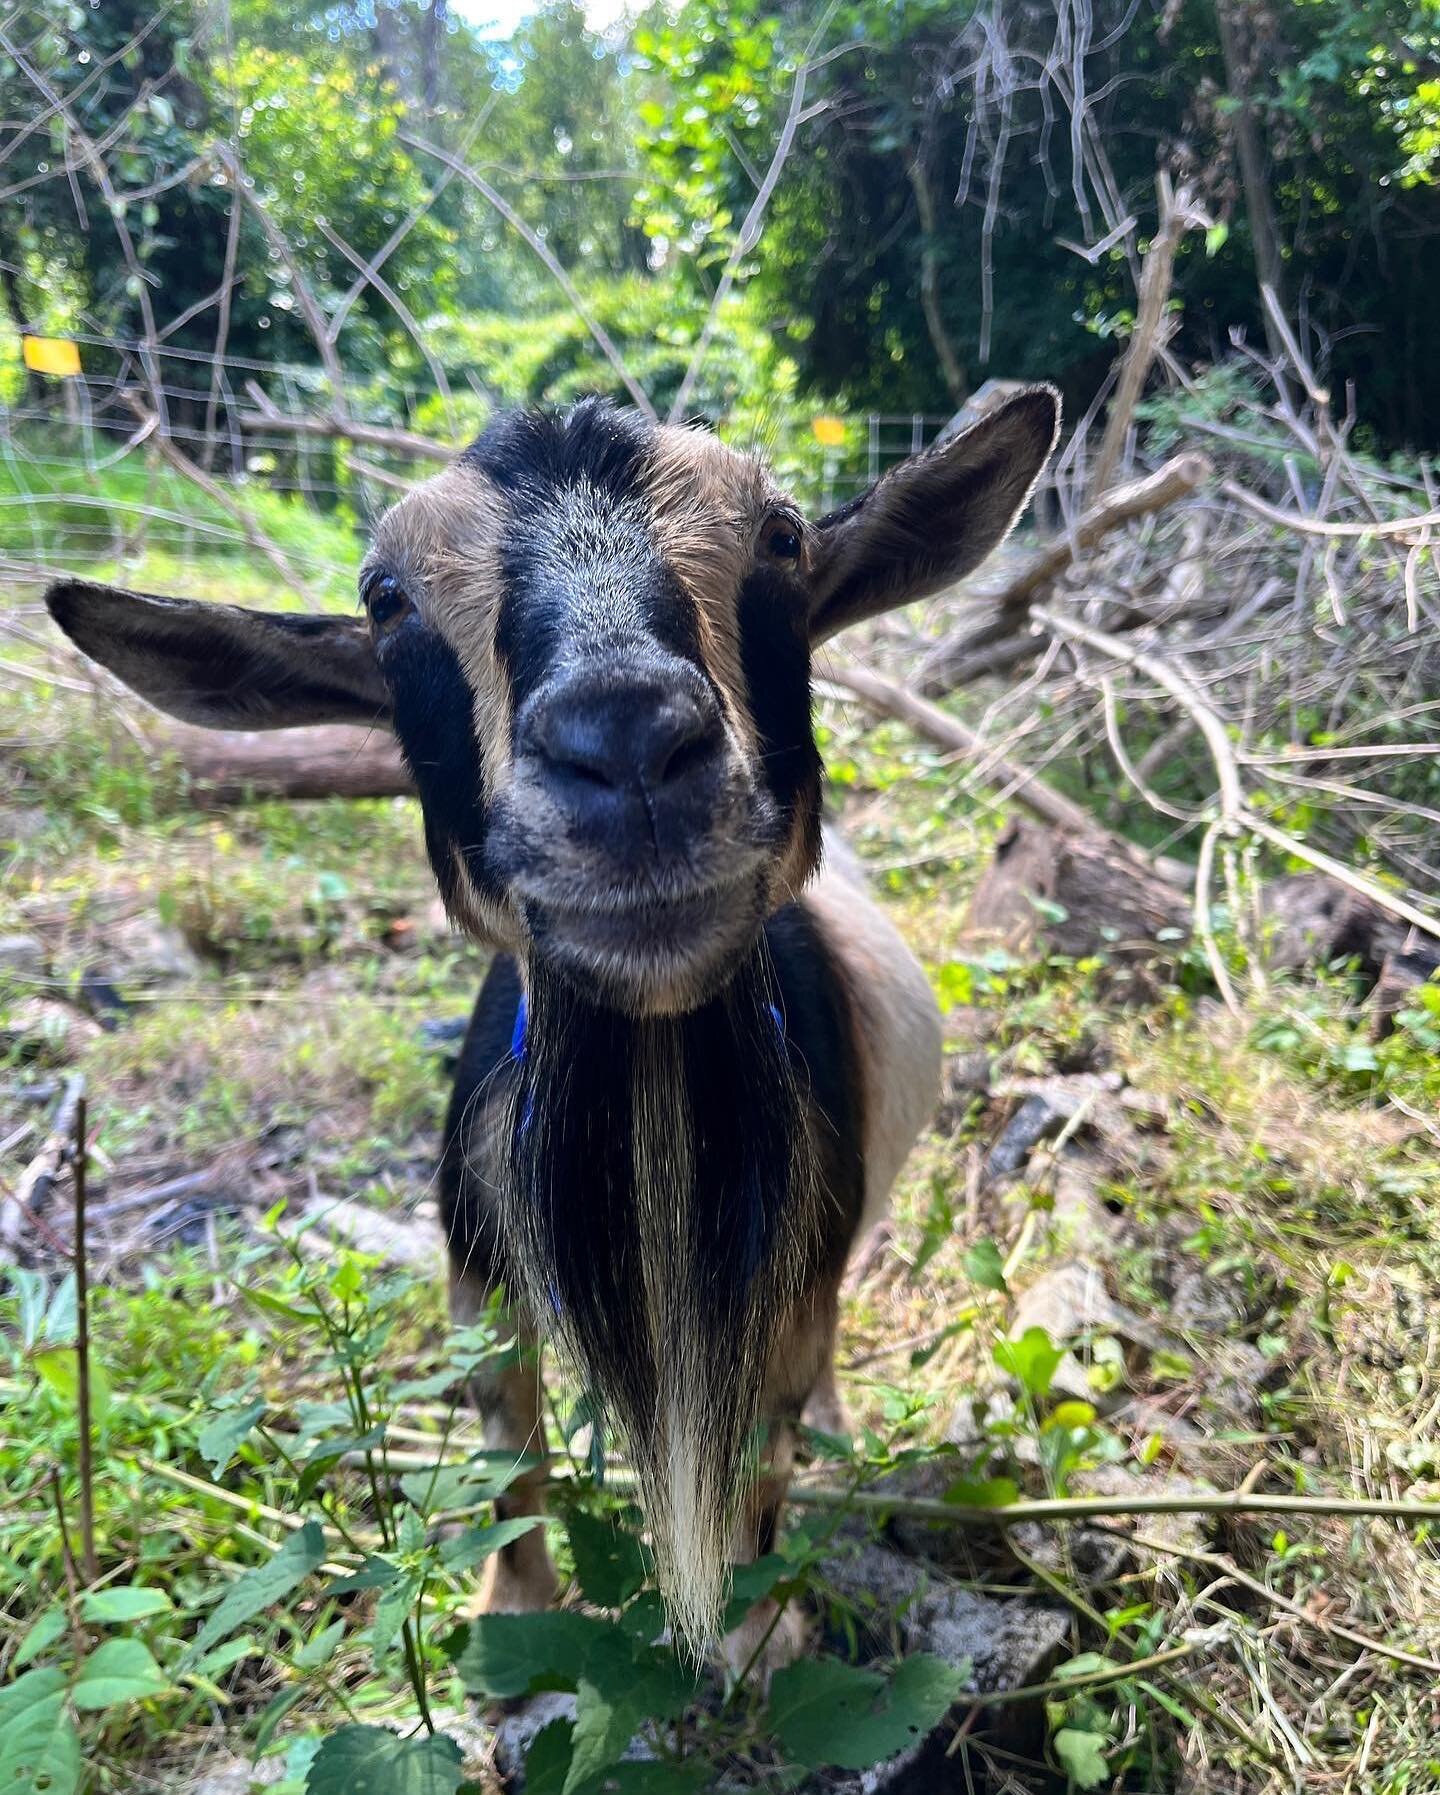 Team Sunshine Appreciation Post! They&rsquo;re enjoying their time eating plenty of overgrown vegetation in the Hazelwood Greenway!

Thanks to @hazelwoodinitiative 
and @landforcepgh for the work they are doing in conjunction with the goats to restor